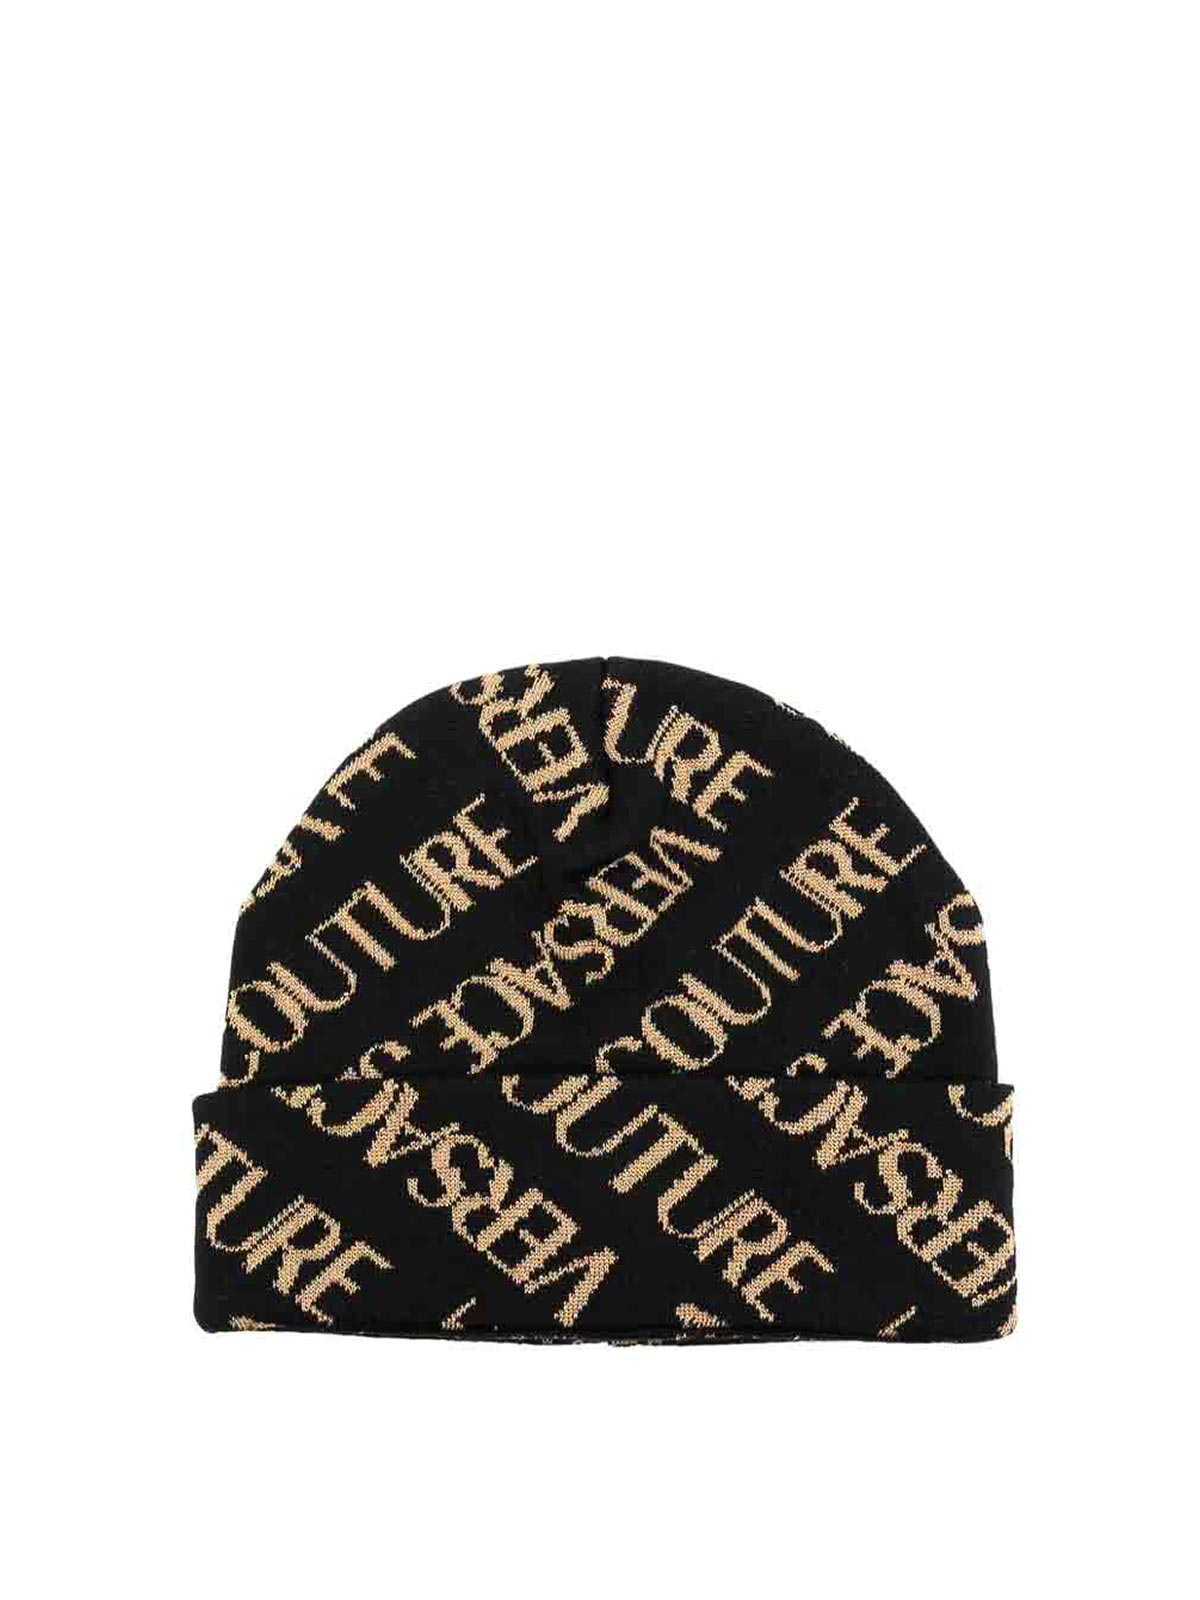 VERSACE JEANS COUTURE COUTURE INTARSIA-KNIT LOGO BEANIE JET BLACK